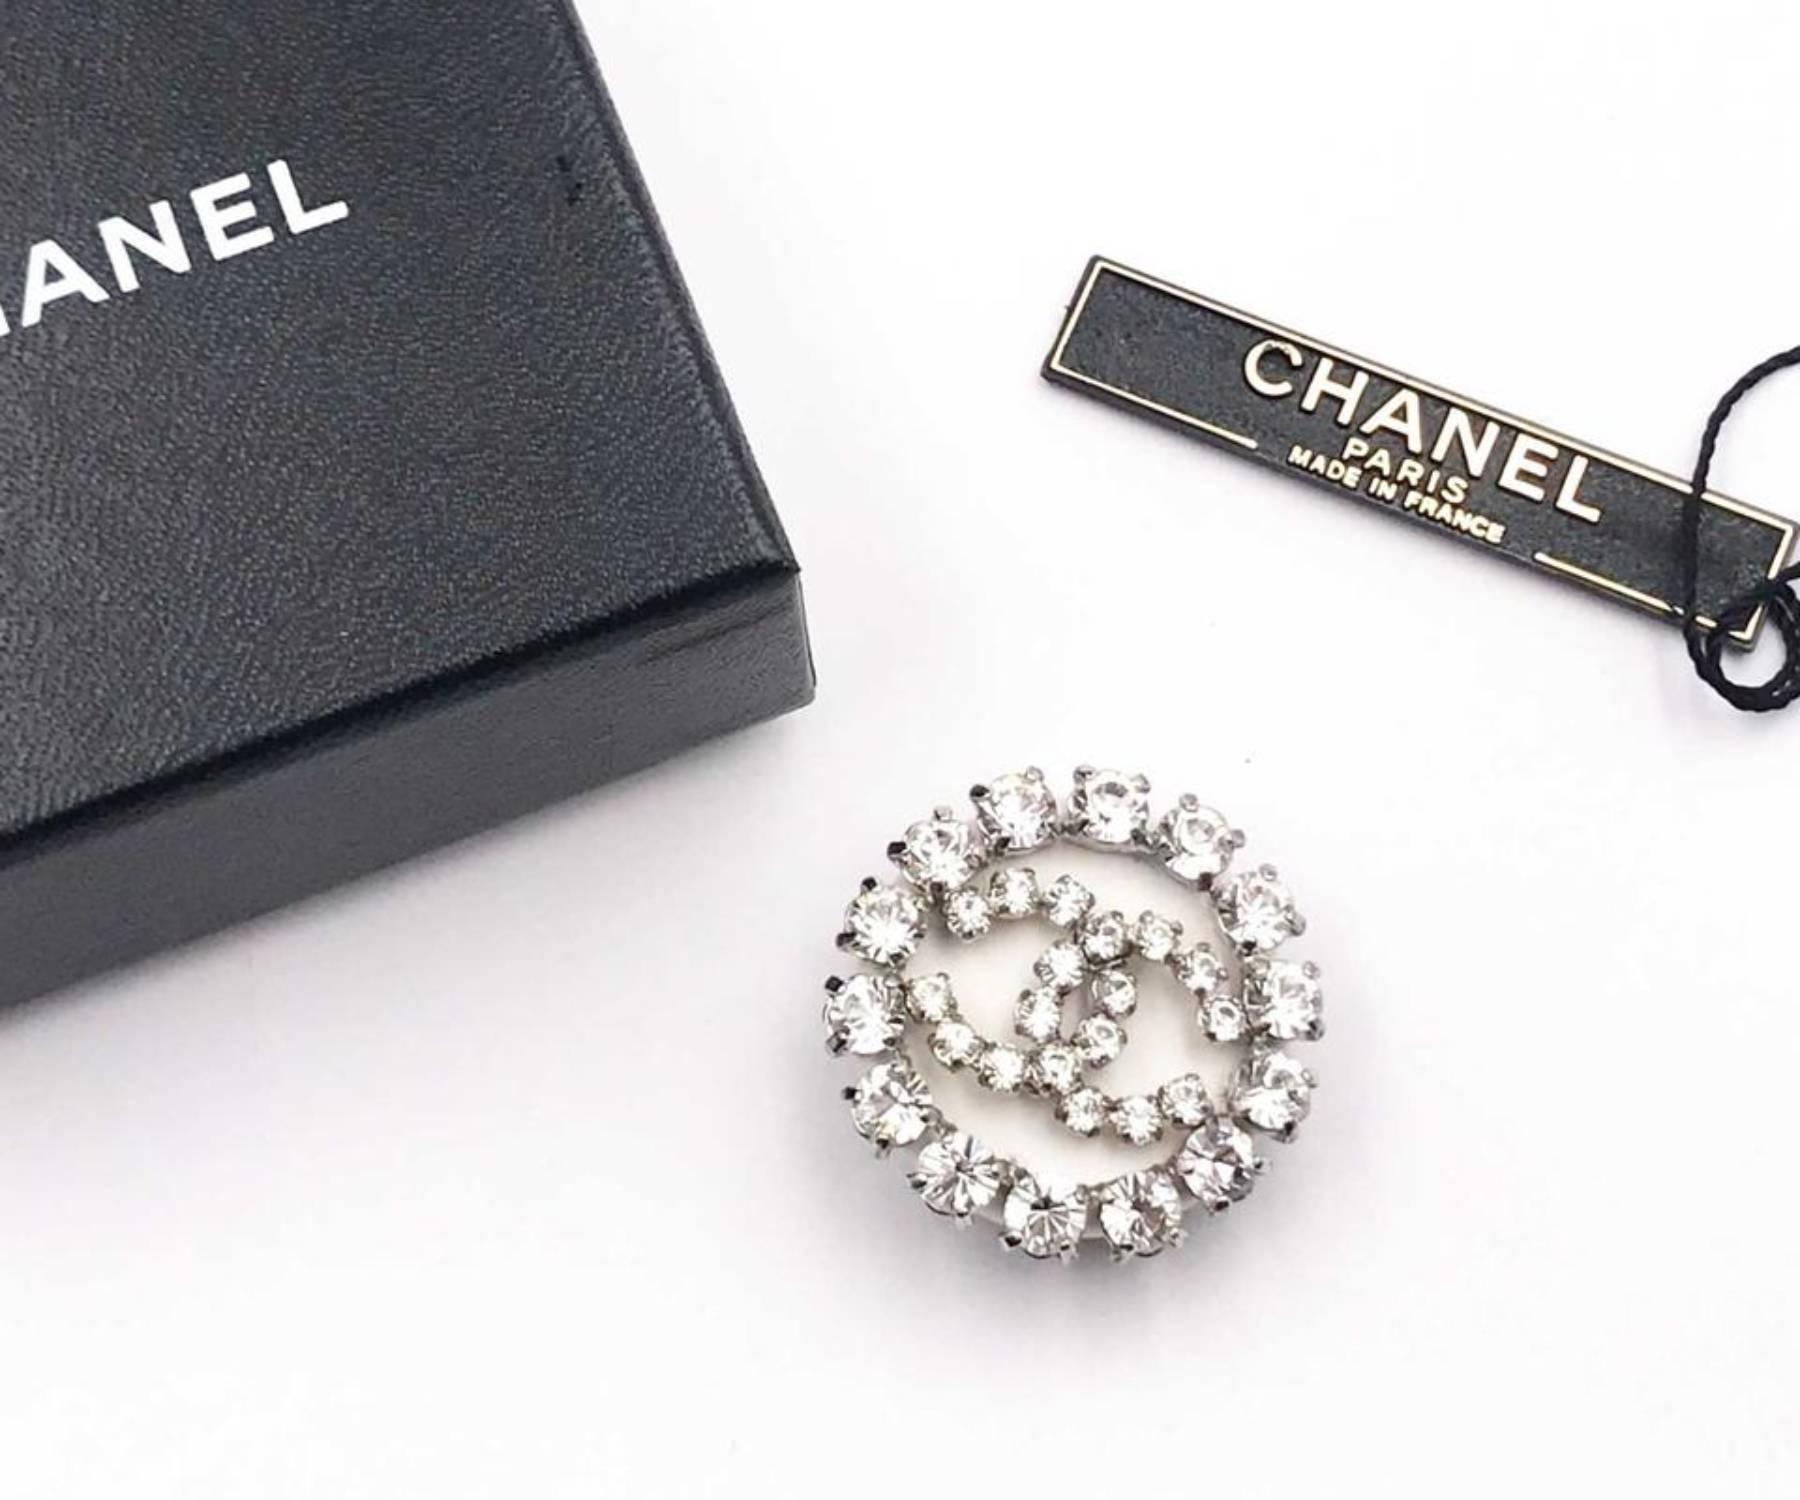 Chanel Silver CC Rocky Crystal Round Small Brooch Pendant

* Marked 00
* Made in France
* Comes with original box and tag

-It is approximately 1.25